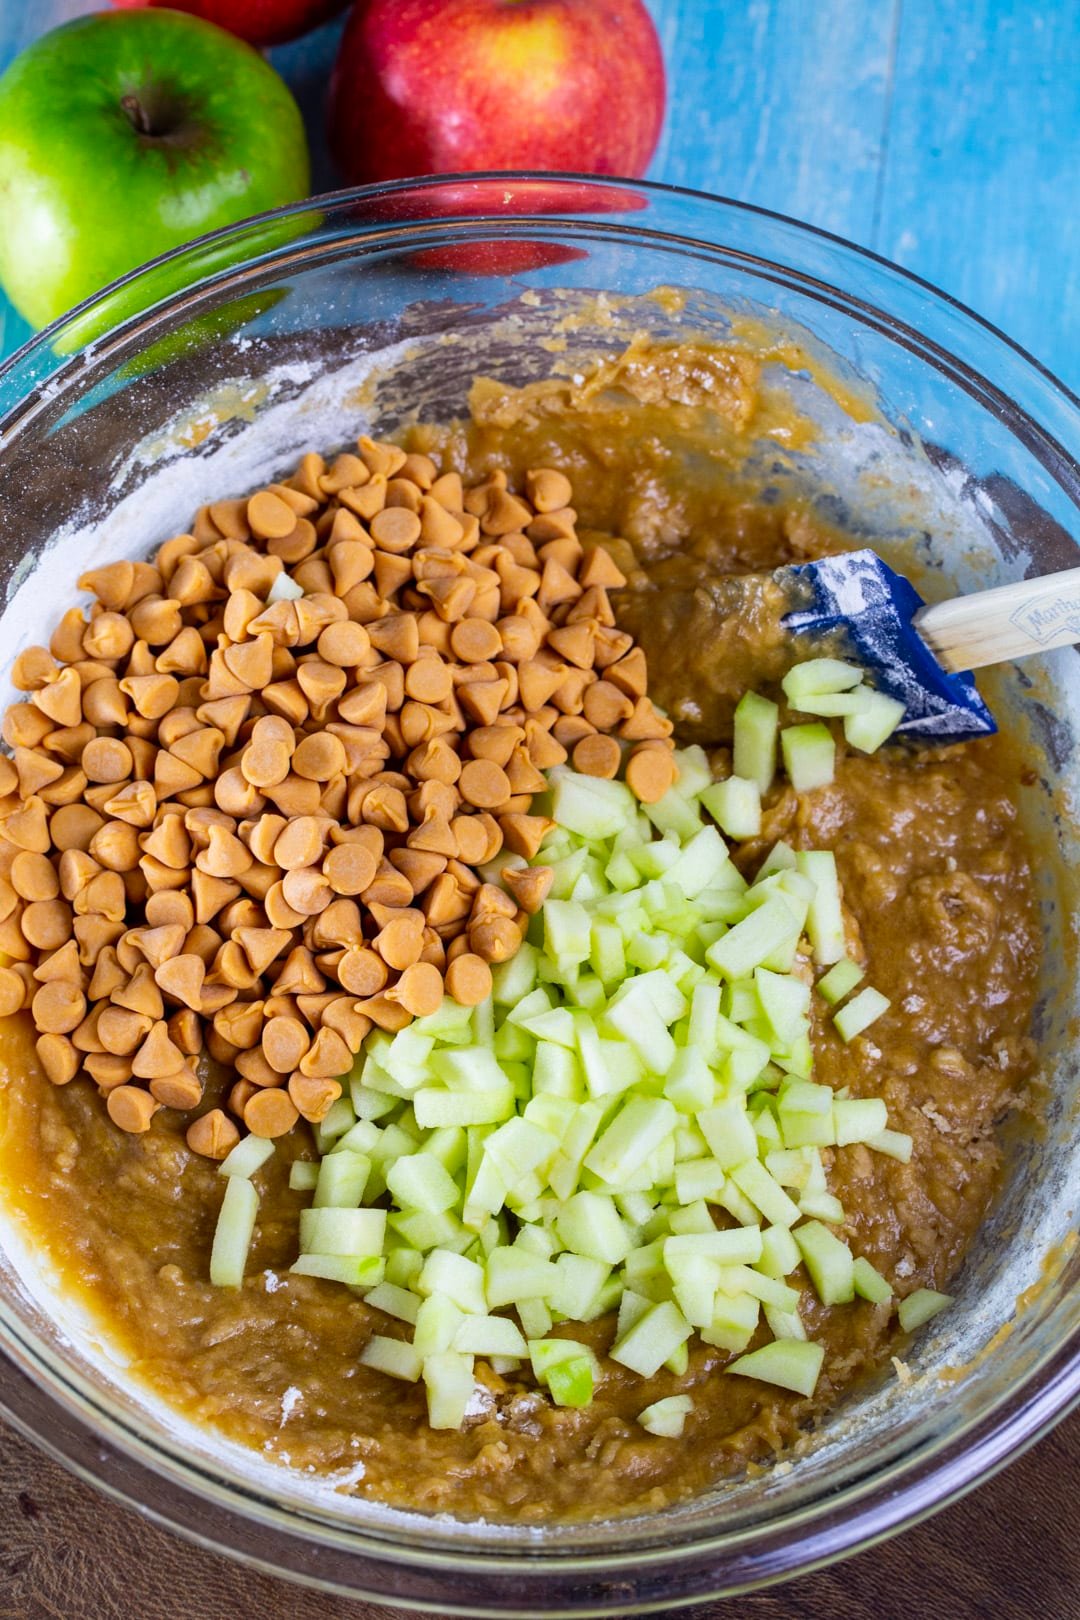 Batter, diced apple, and butterscotch chips in a mixing bowl.